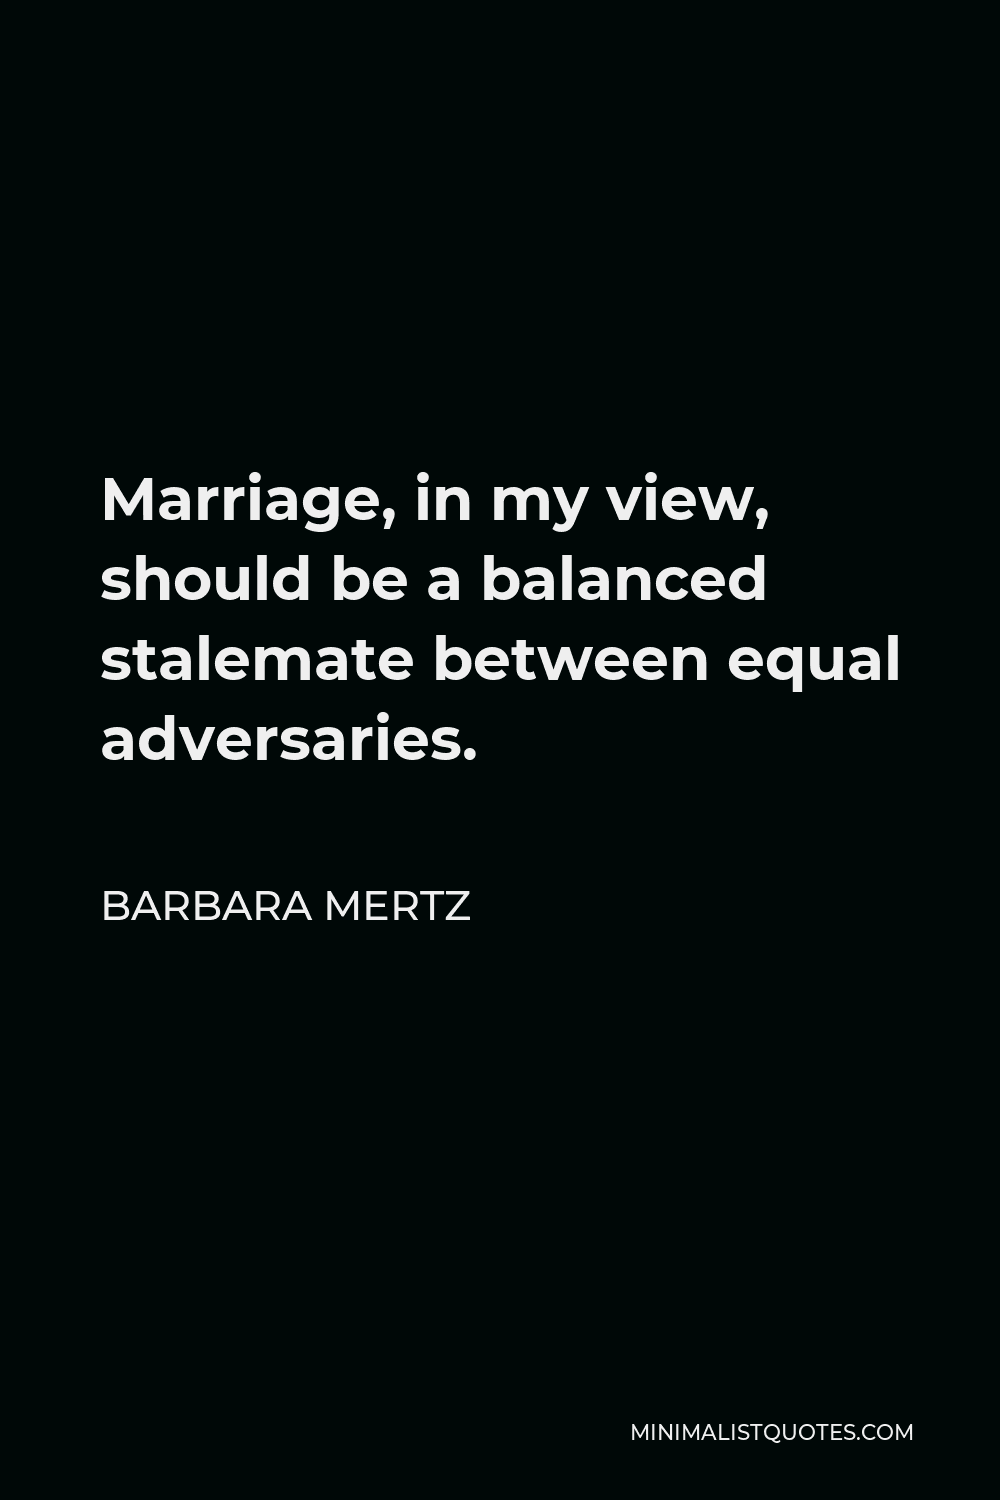 Barbara Mertz Quote - Marriage, in my view, should be a balanced stalemate between equal adversaries.